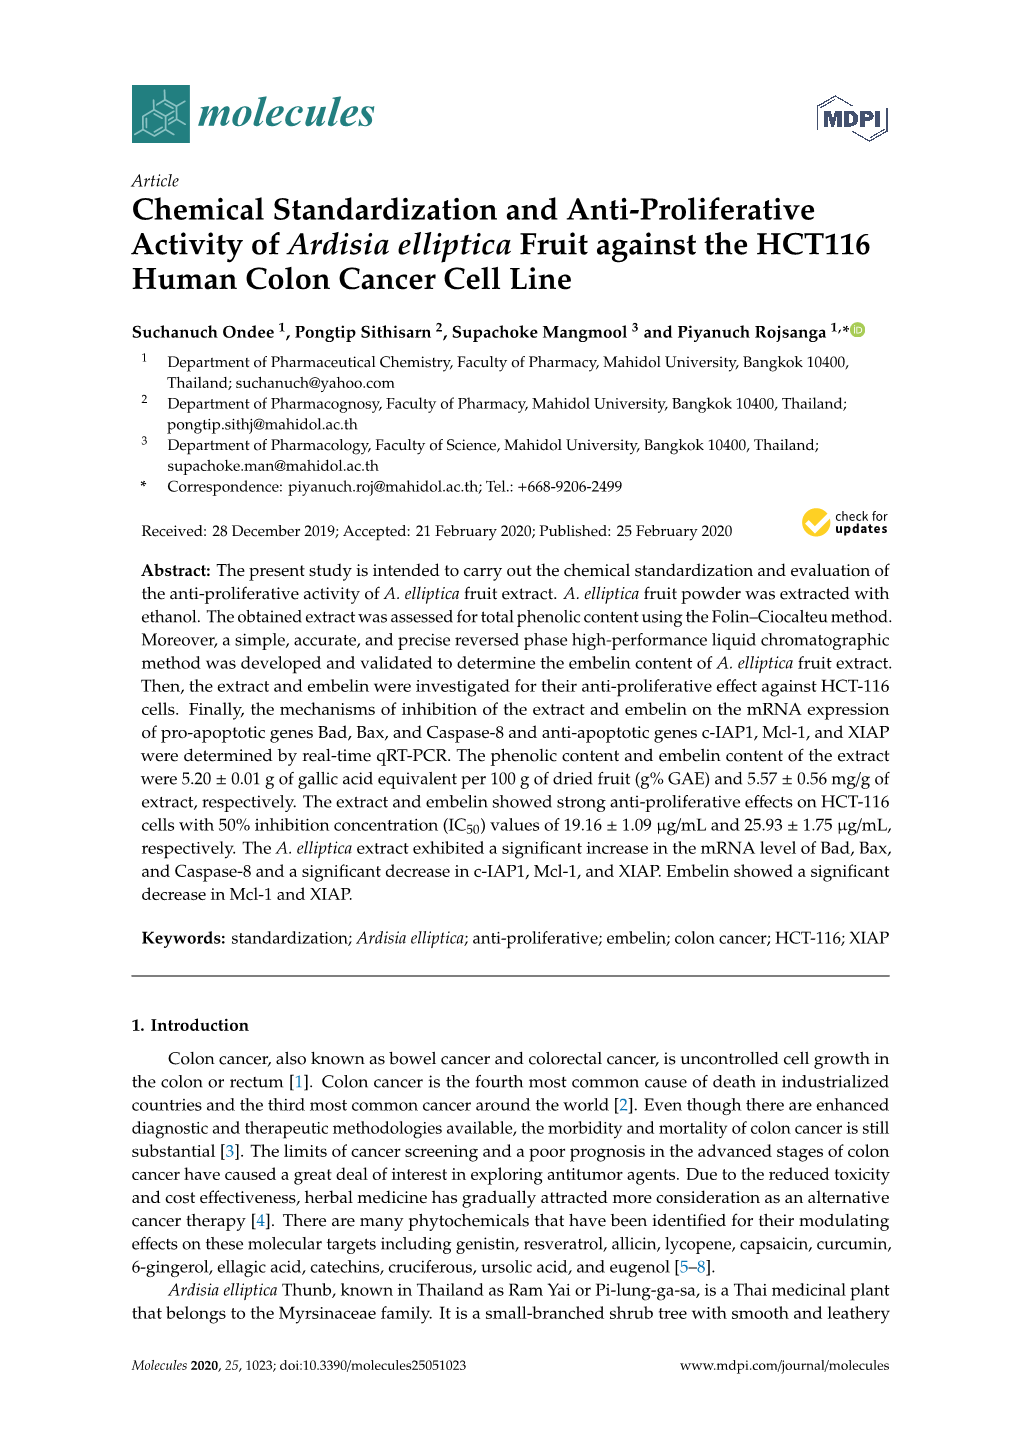 Chemical Standardization and Anti-Proliferative Activity of Ardisia Elliptica Fruit Against the HCT116 Human Colon Cancer Cell Line